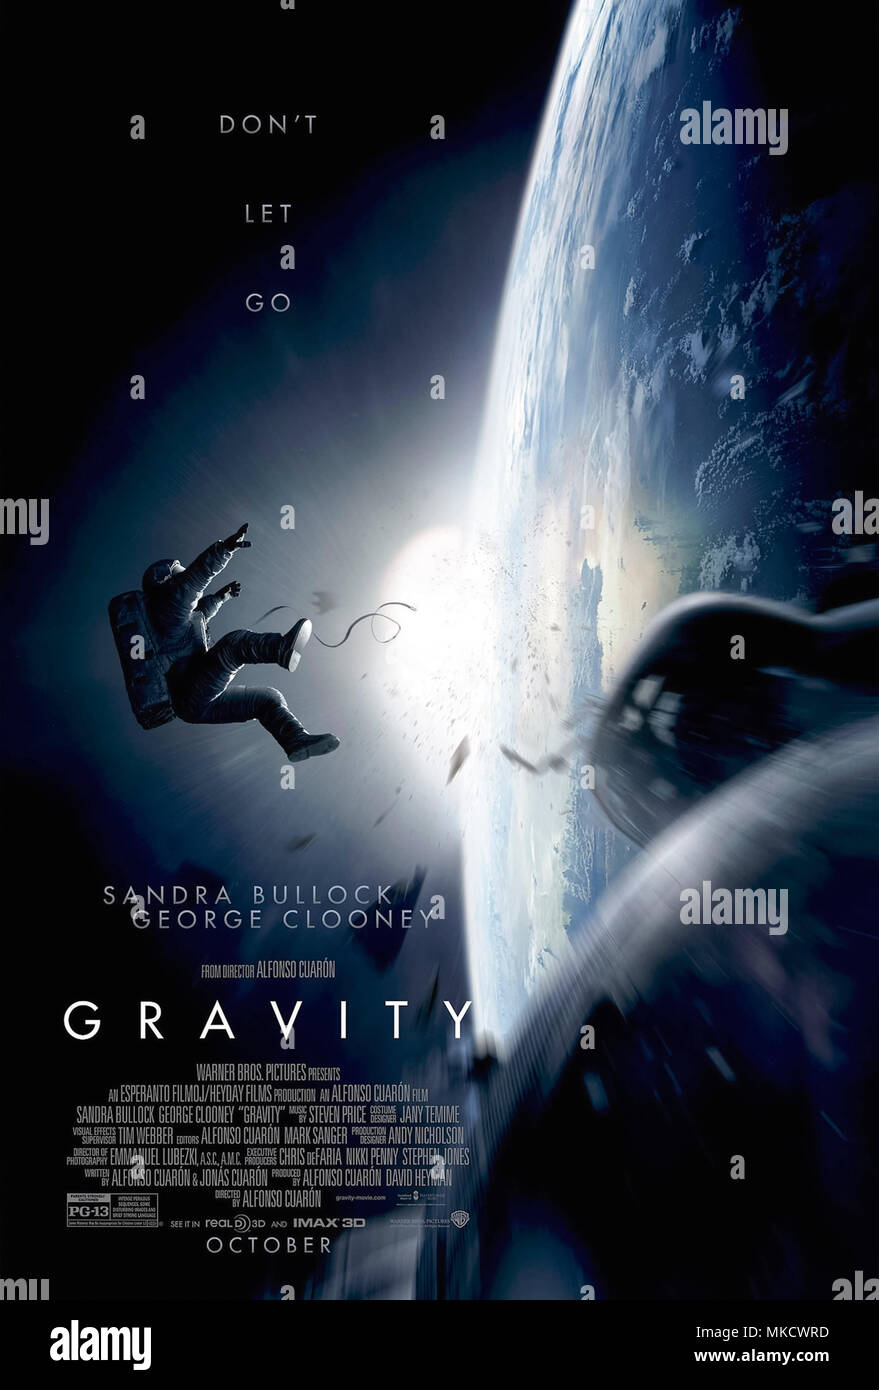 Gravity (2013) directed by Alfonso Cuarón and starring Sandra Bullock, George Clooney and Ed Harris. Space debris from a satellite breakup leaves two astronauts on a spacewalk stranded alone in space. Stock Photo